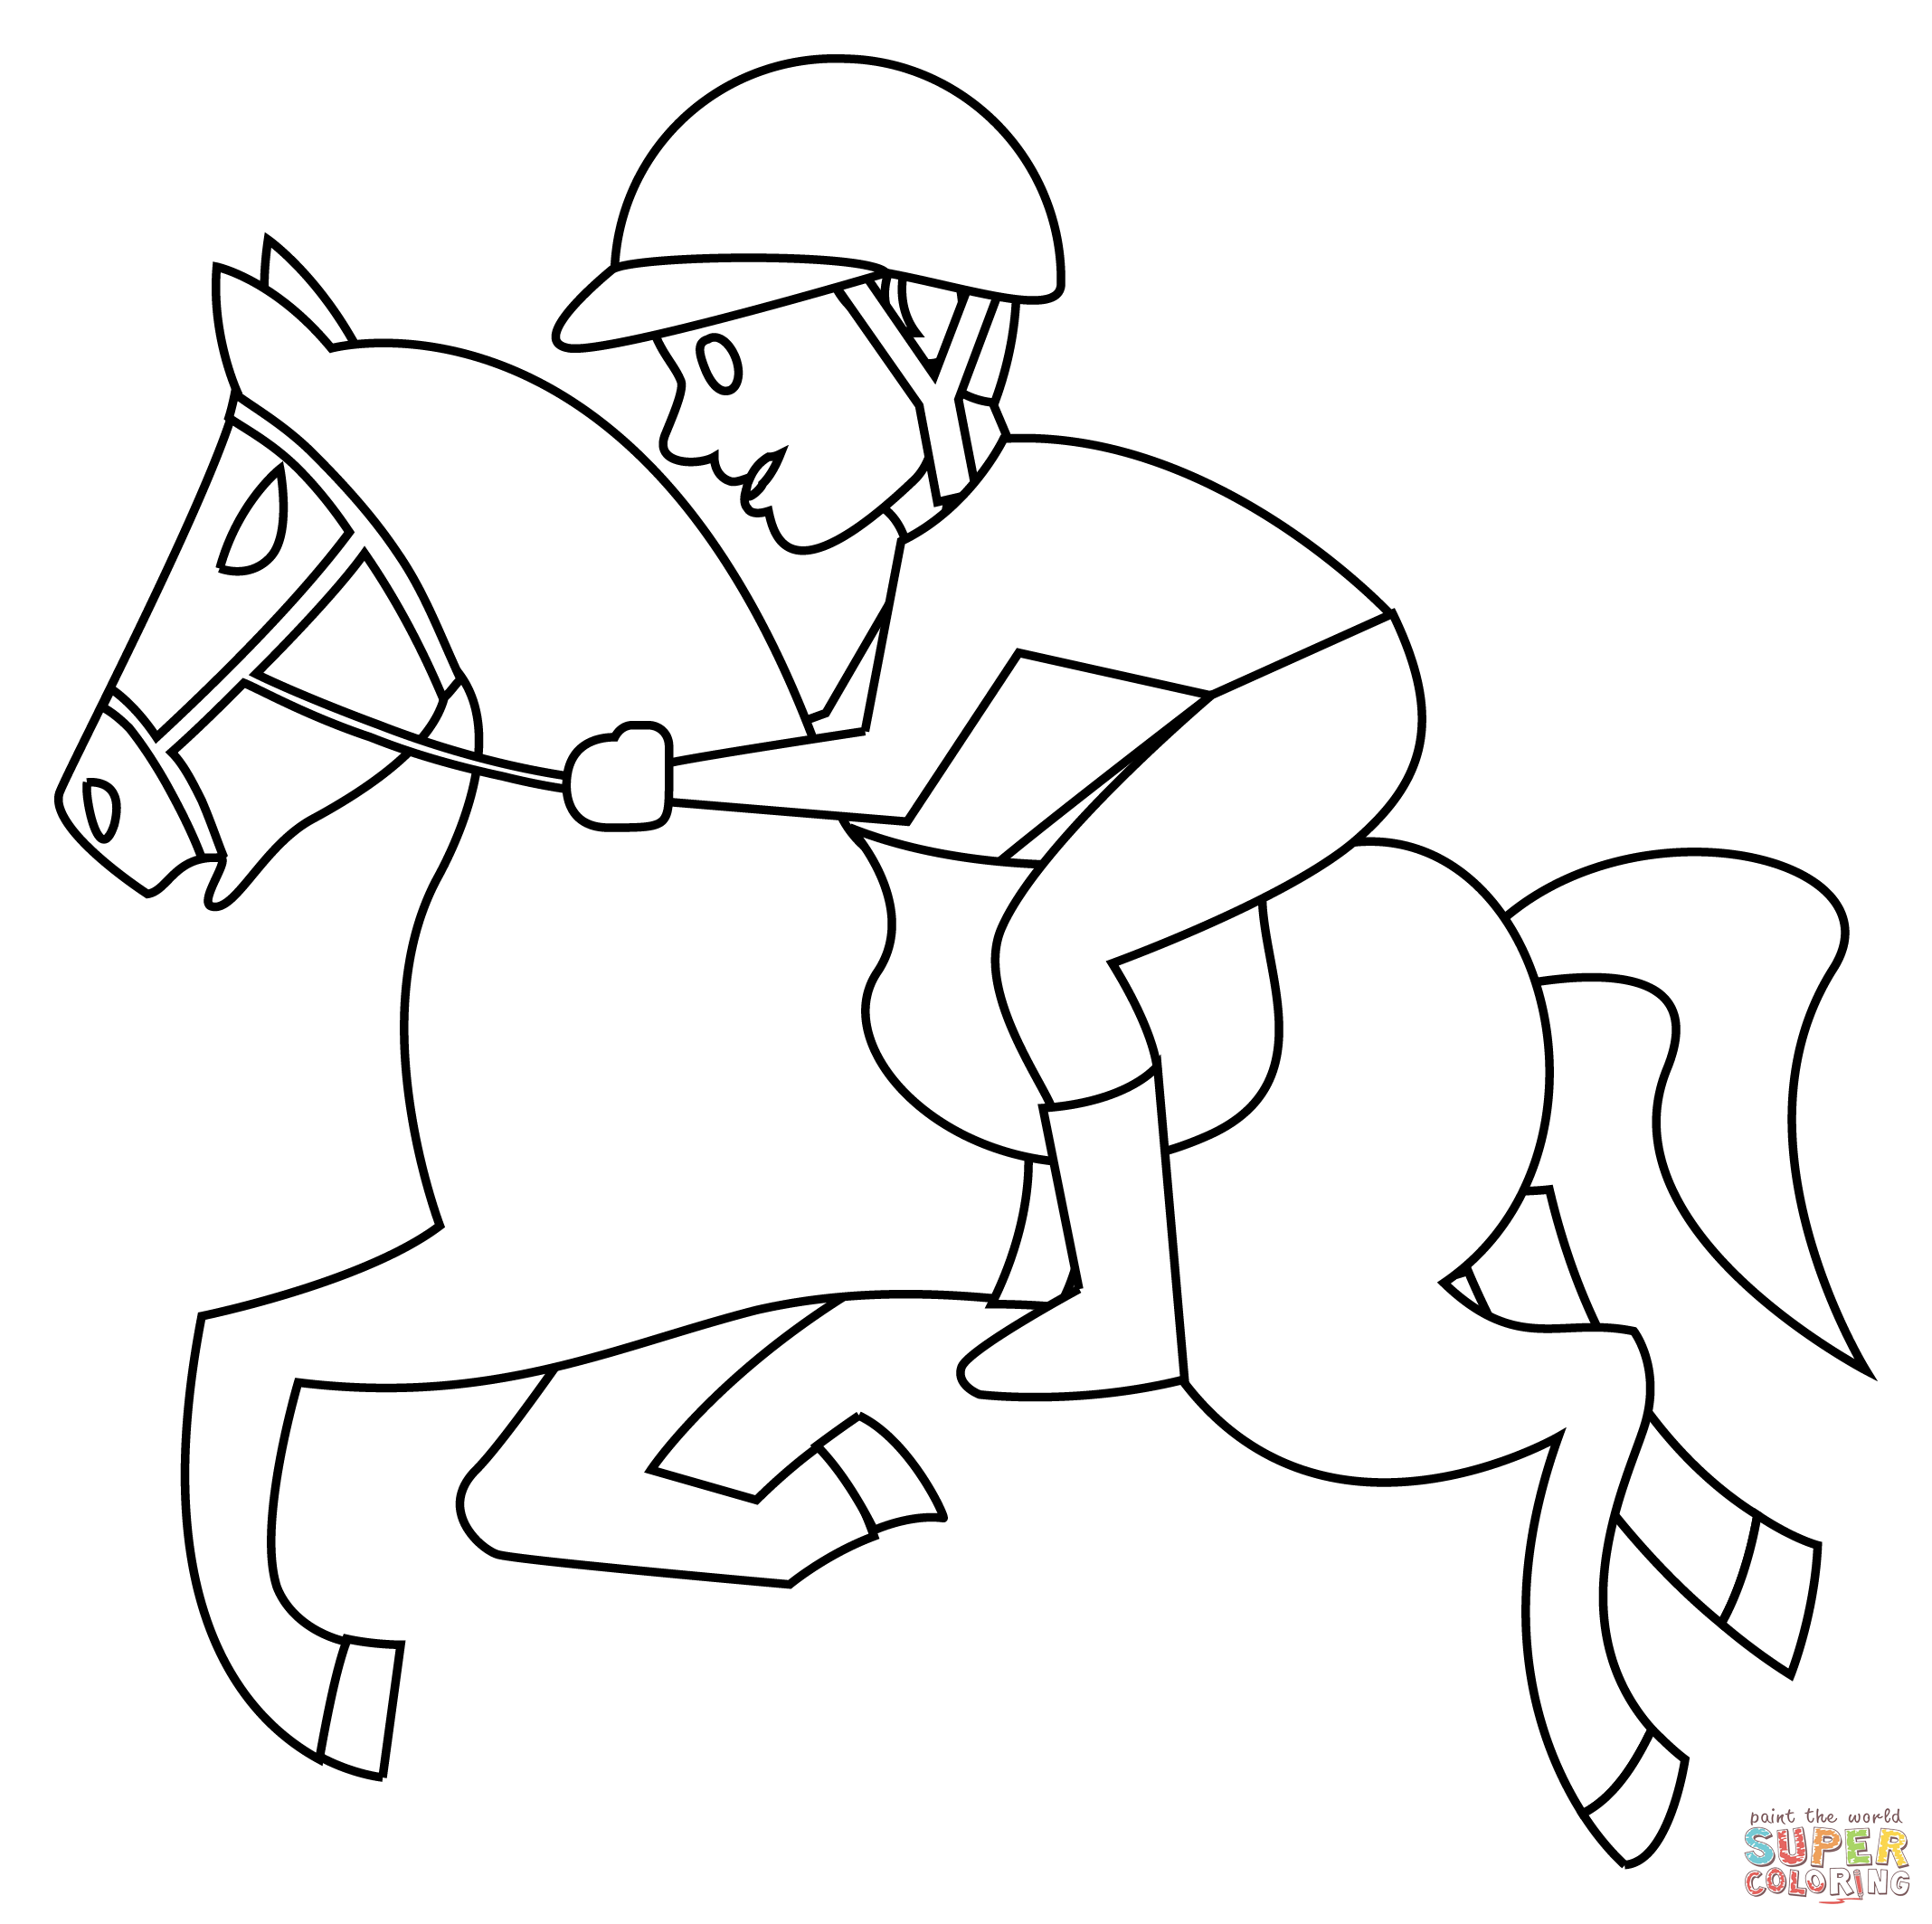 Horse racing coloring page free printable coloring pages